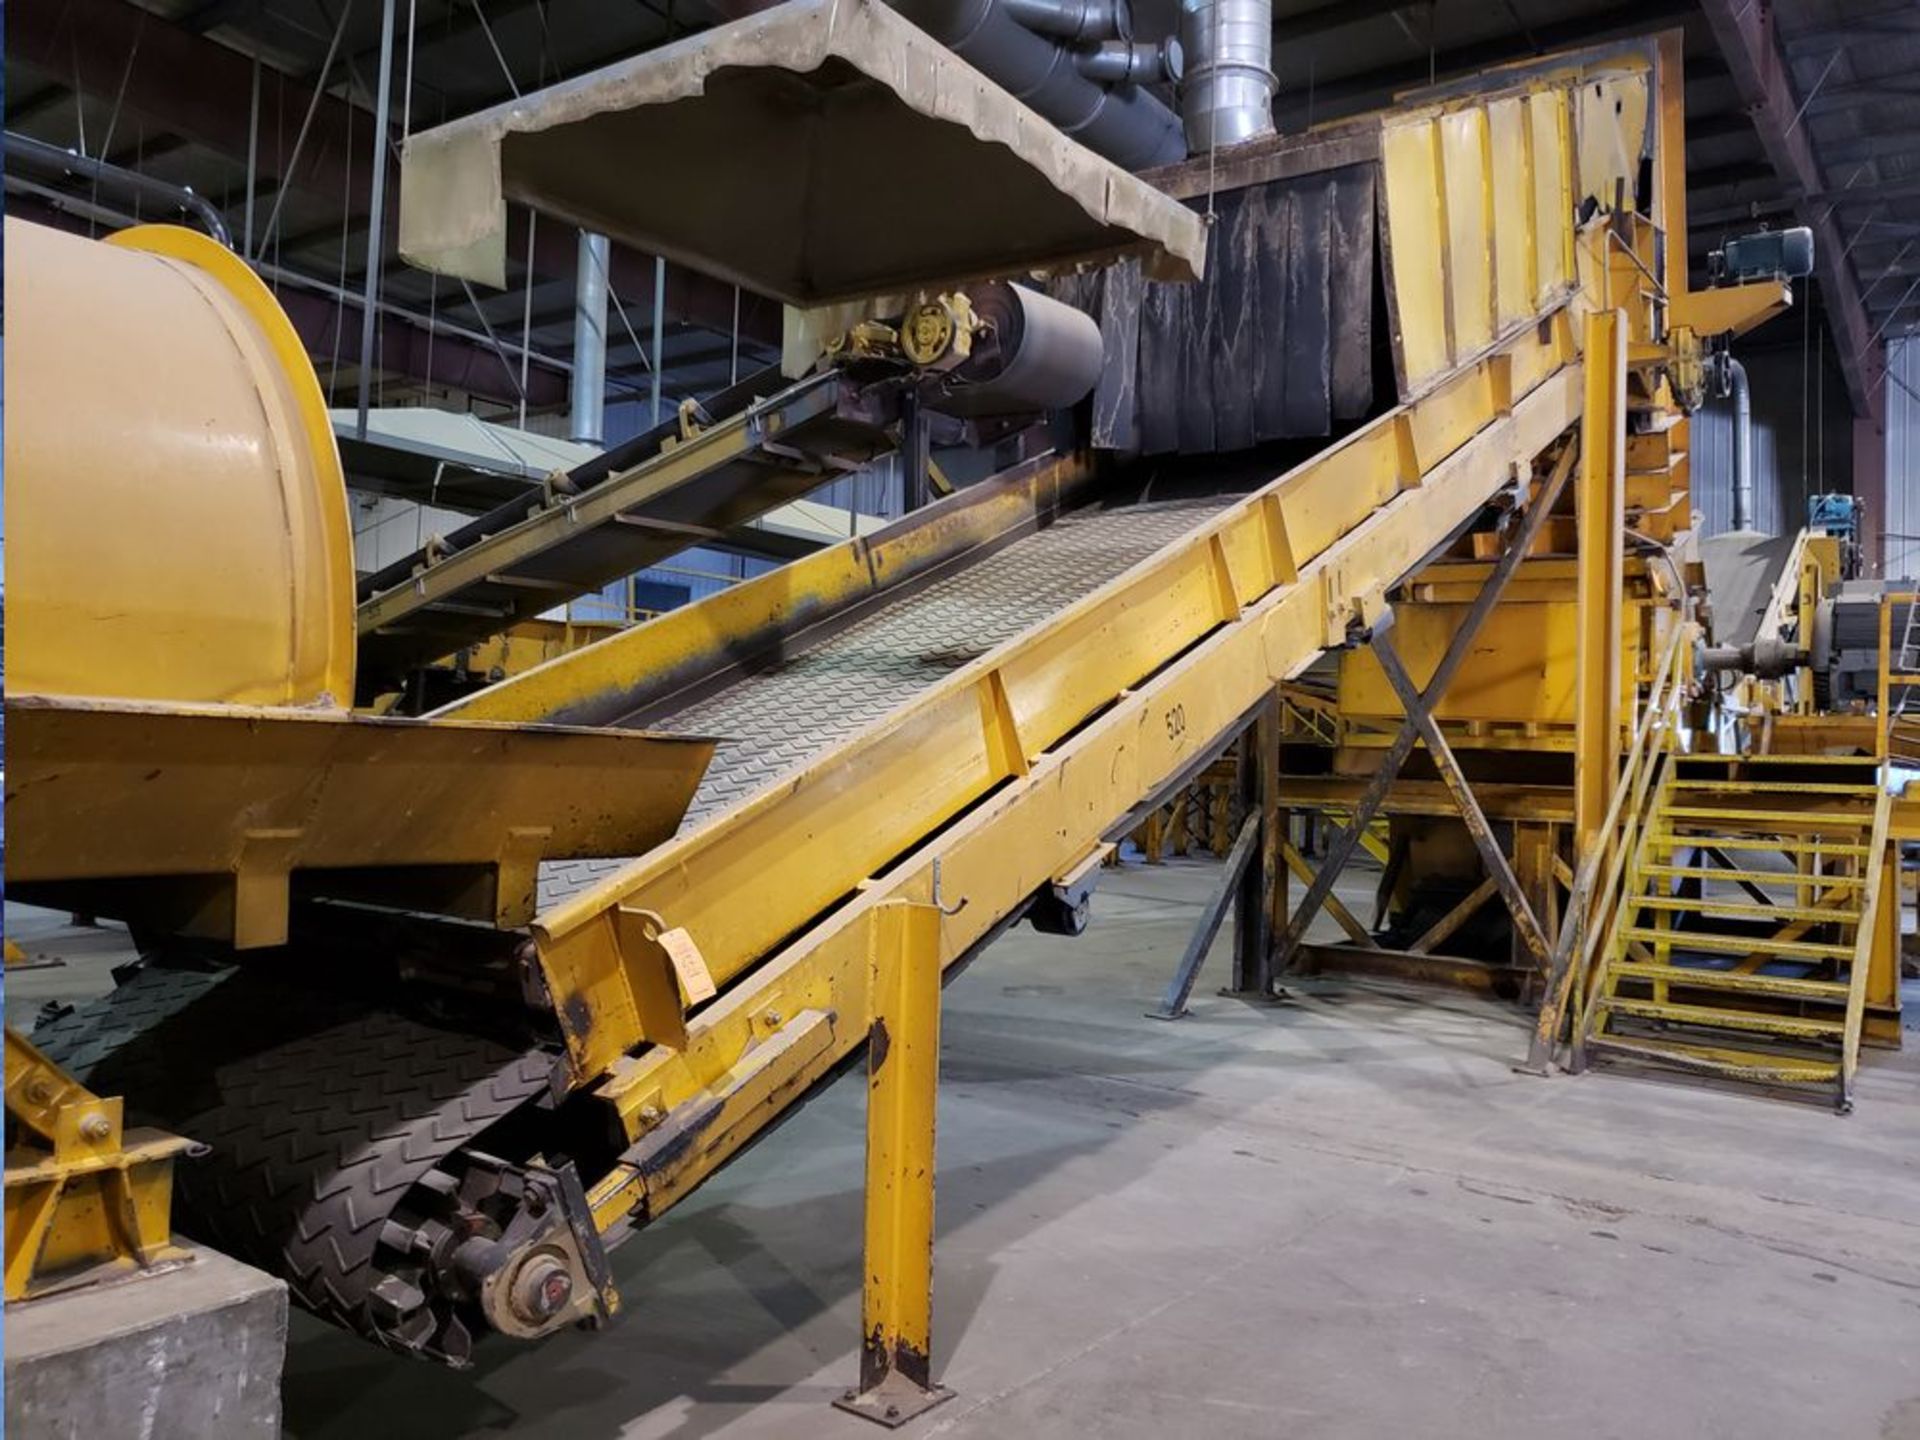 CONVEYOR 520 72" X 35' (LOCATED AT: 29861 OLD HWY 33, ELKHART, IN 46516)